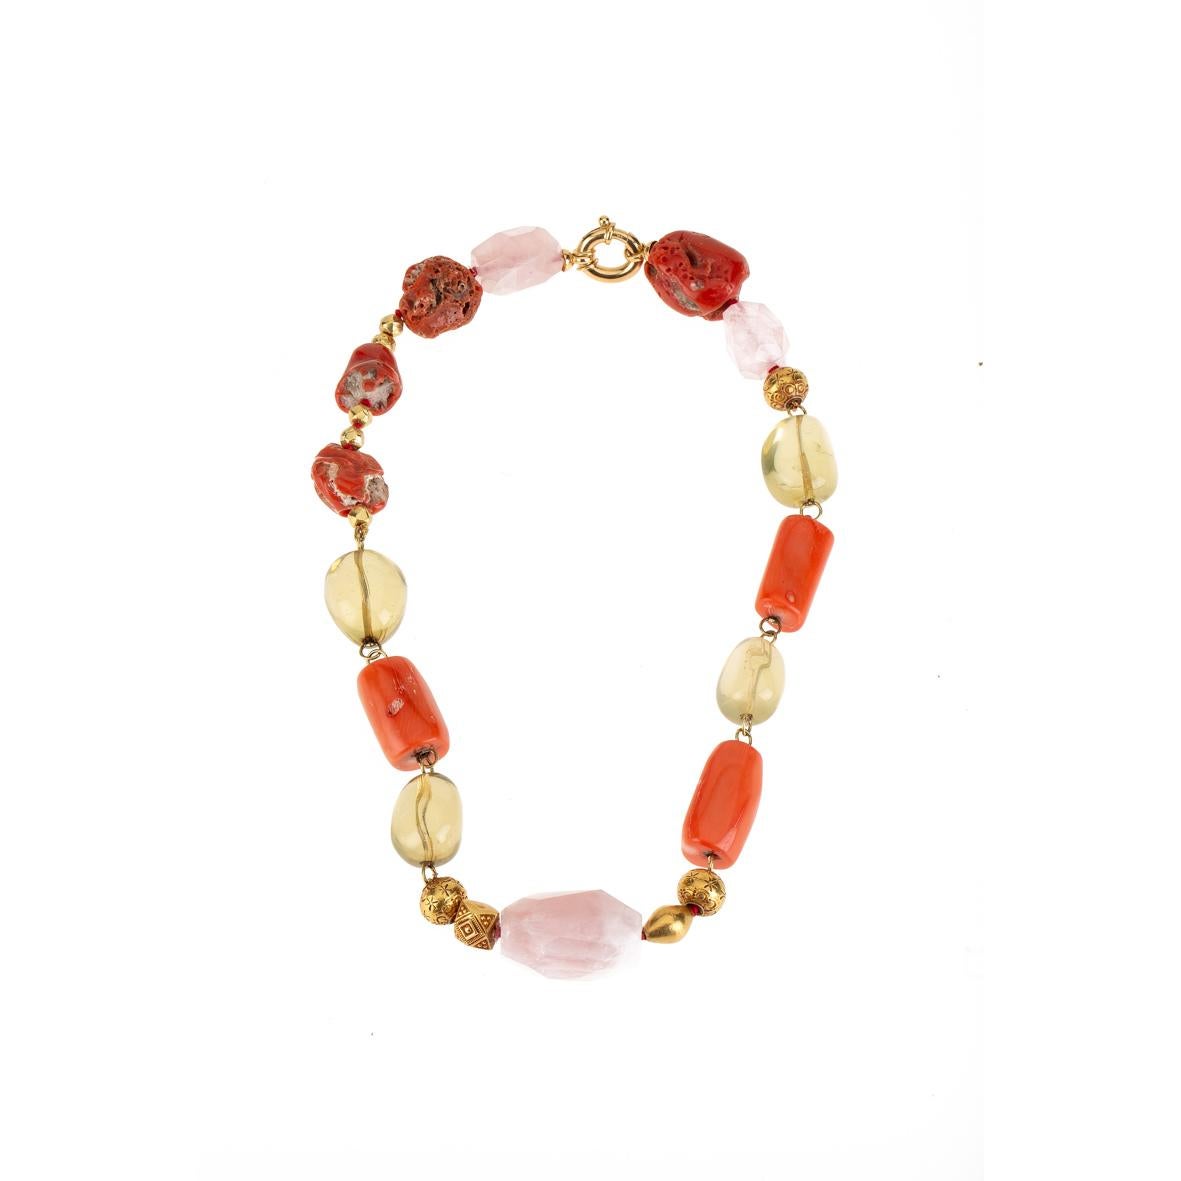 Necklace with orange end red  coral, citrine, antiques Indian  engrave gold beads, faced rose quartz linked in gold 18kt gr. 10,40. Total length 44cm.
All Giulia Colussi jewelry is new and has never been previously owned or worn. Each item will